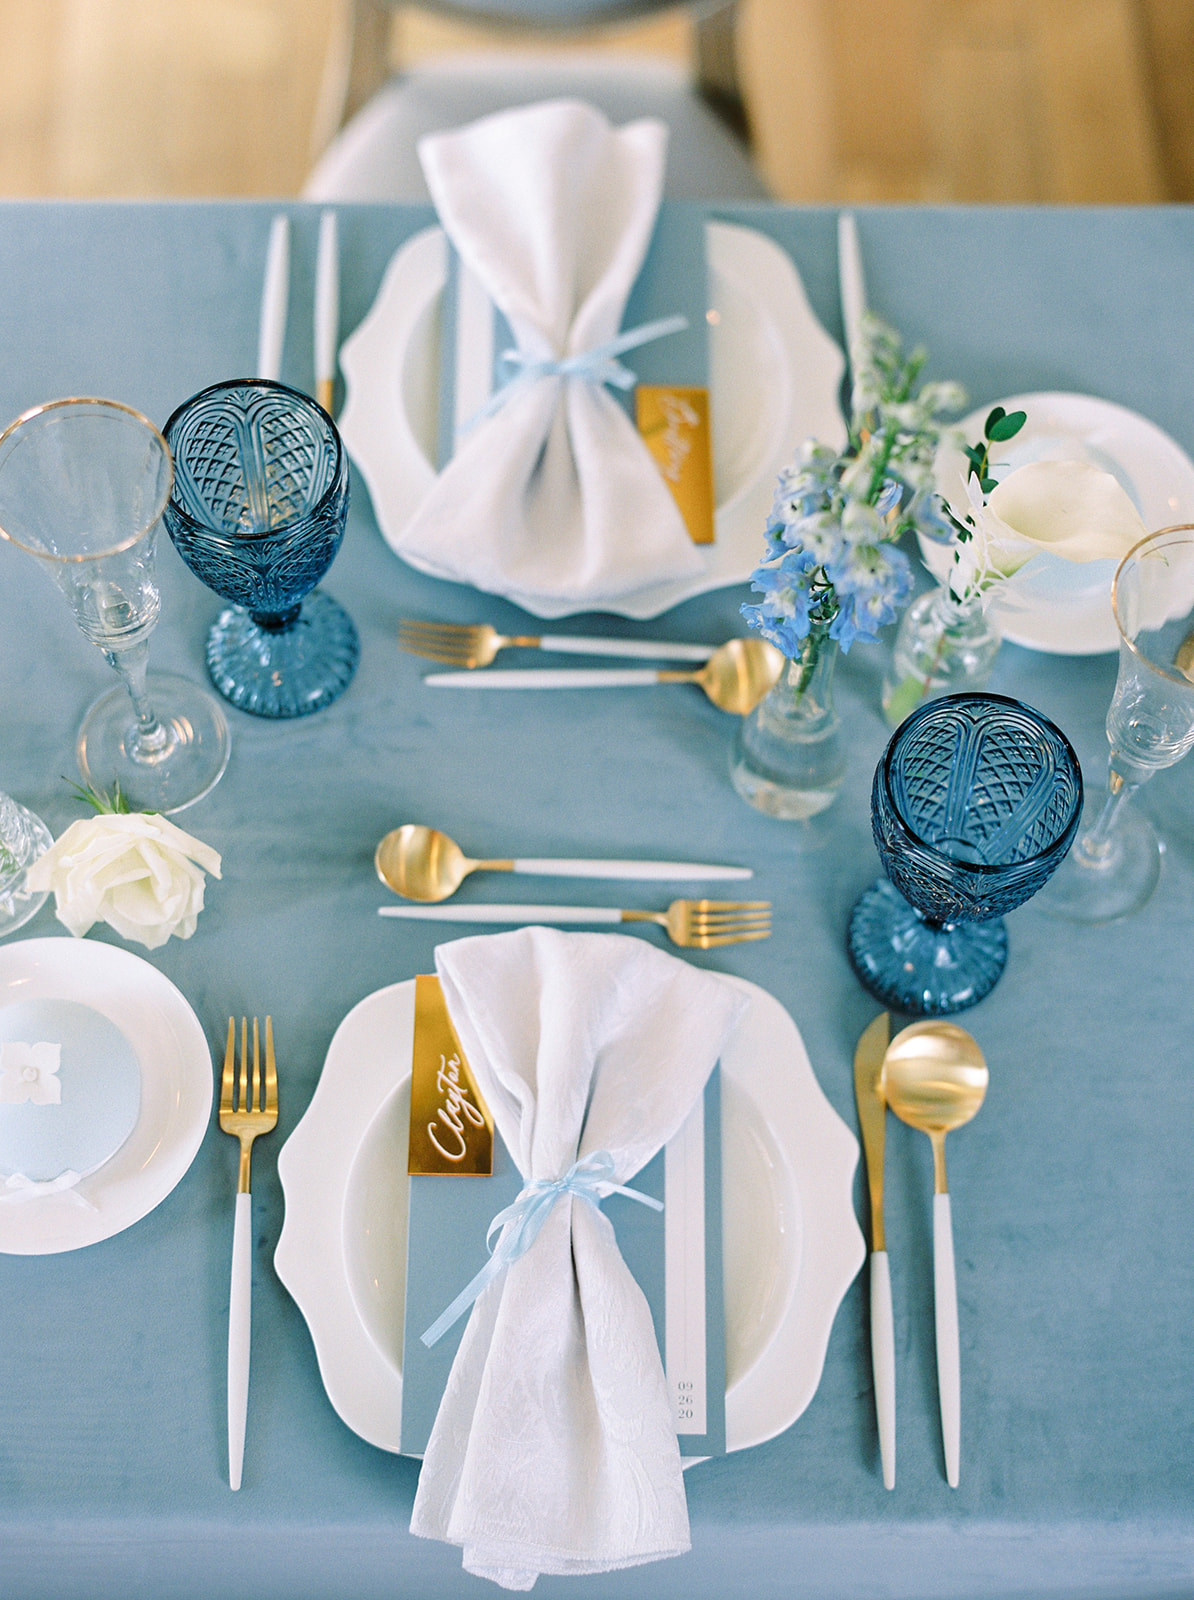 Craving a Paris Getaway? This Parisian Wedding Inspiration Will Transport You To a Quaint Town In France Featured by Brontë Bride, blue tablescape, wedding place settings